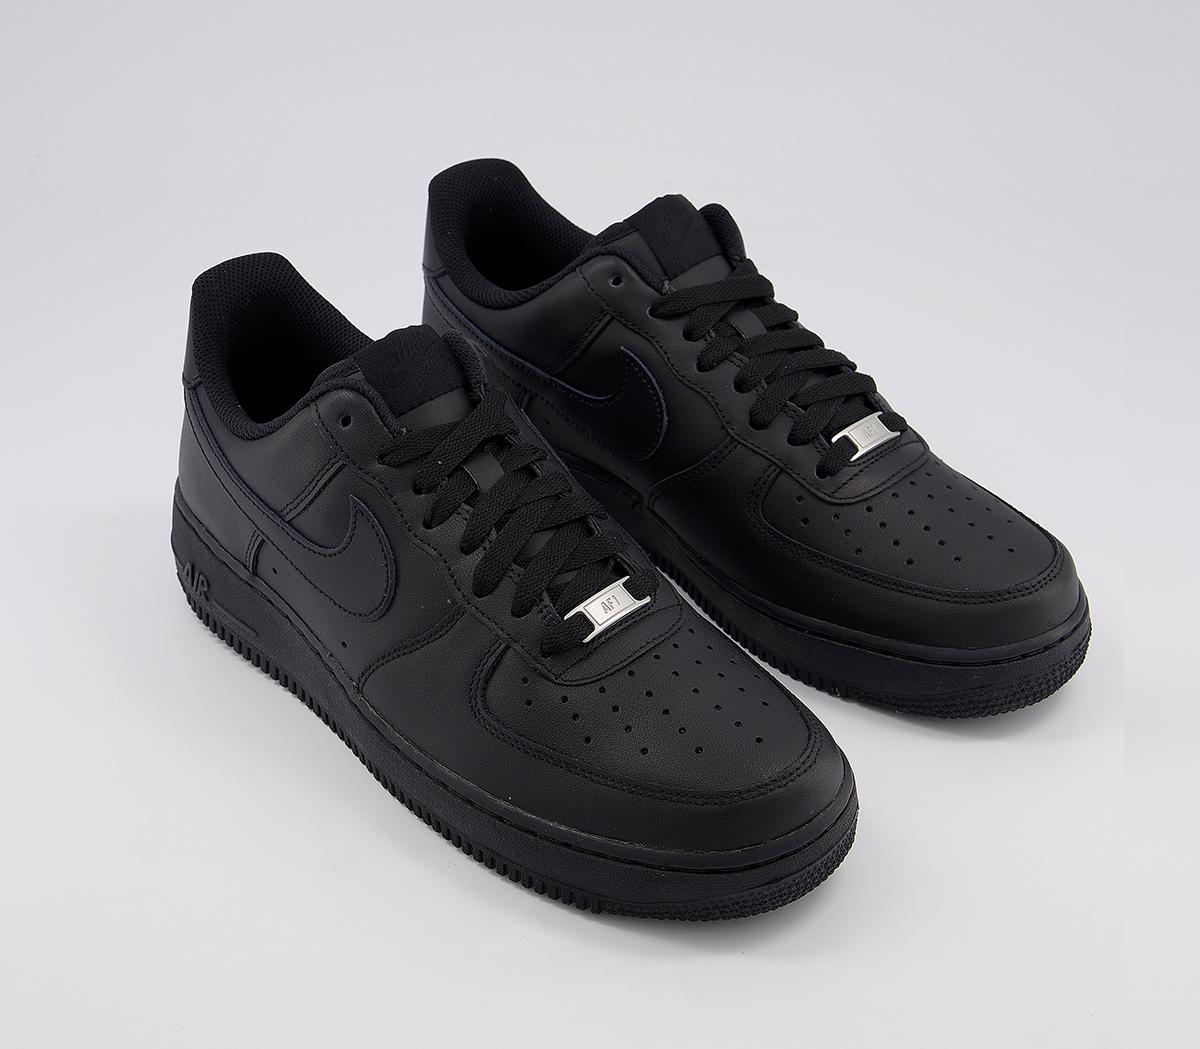 Nike Air Force 1 Trainers Black - His trainers